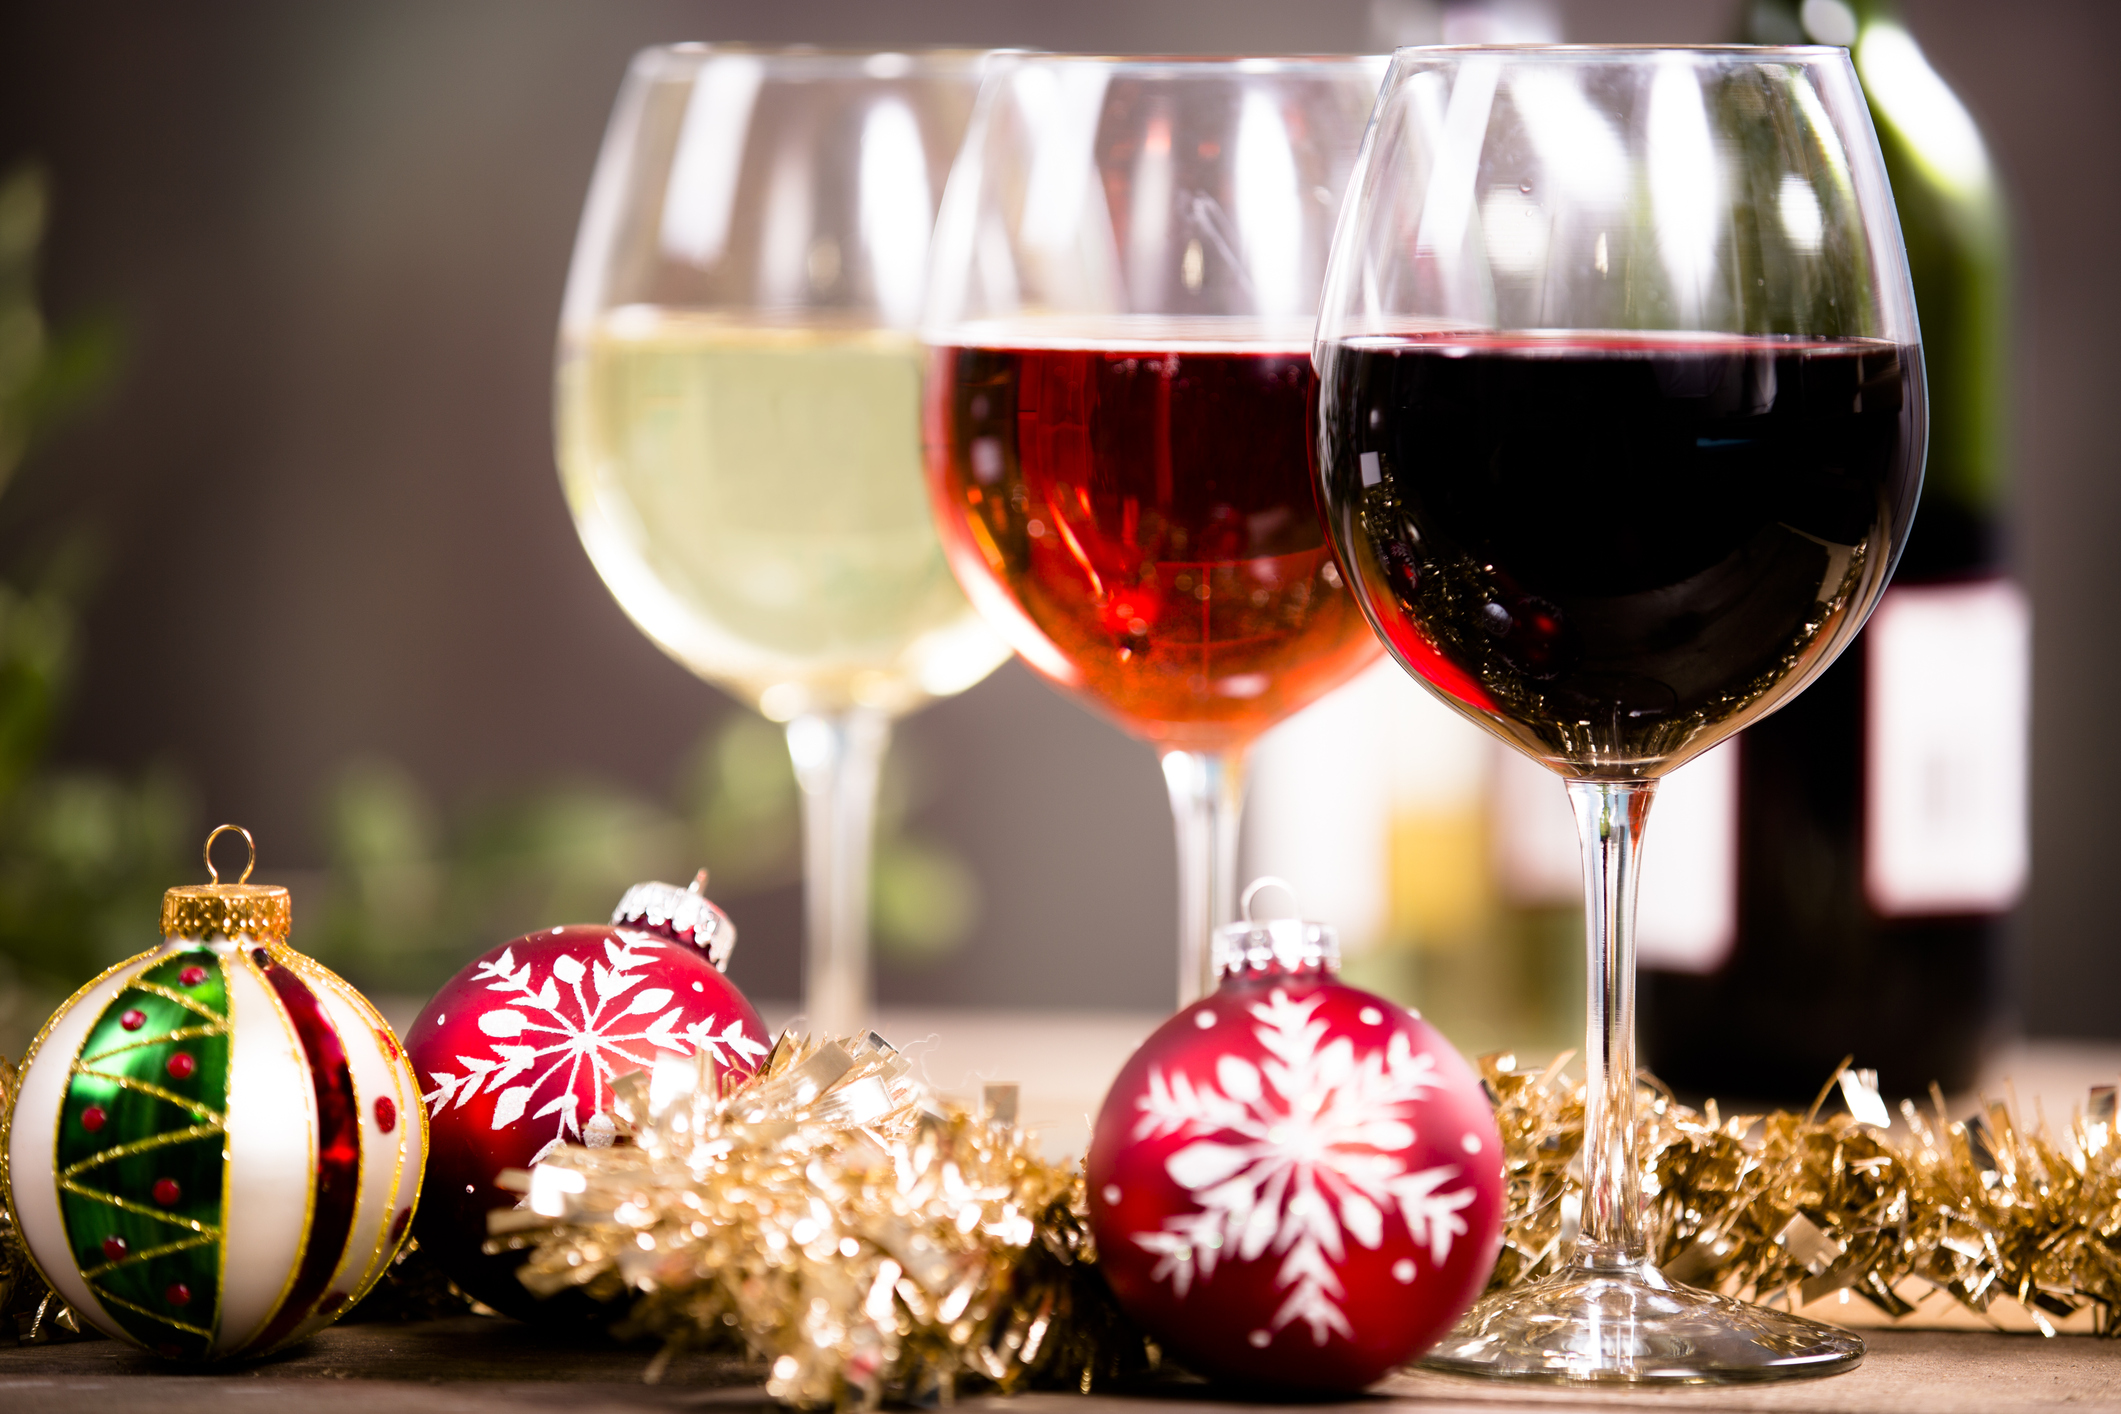 Tastings.com Upgrades Your Holiday Wines Without Breaking the Bank